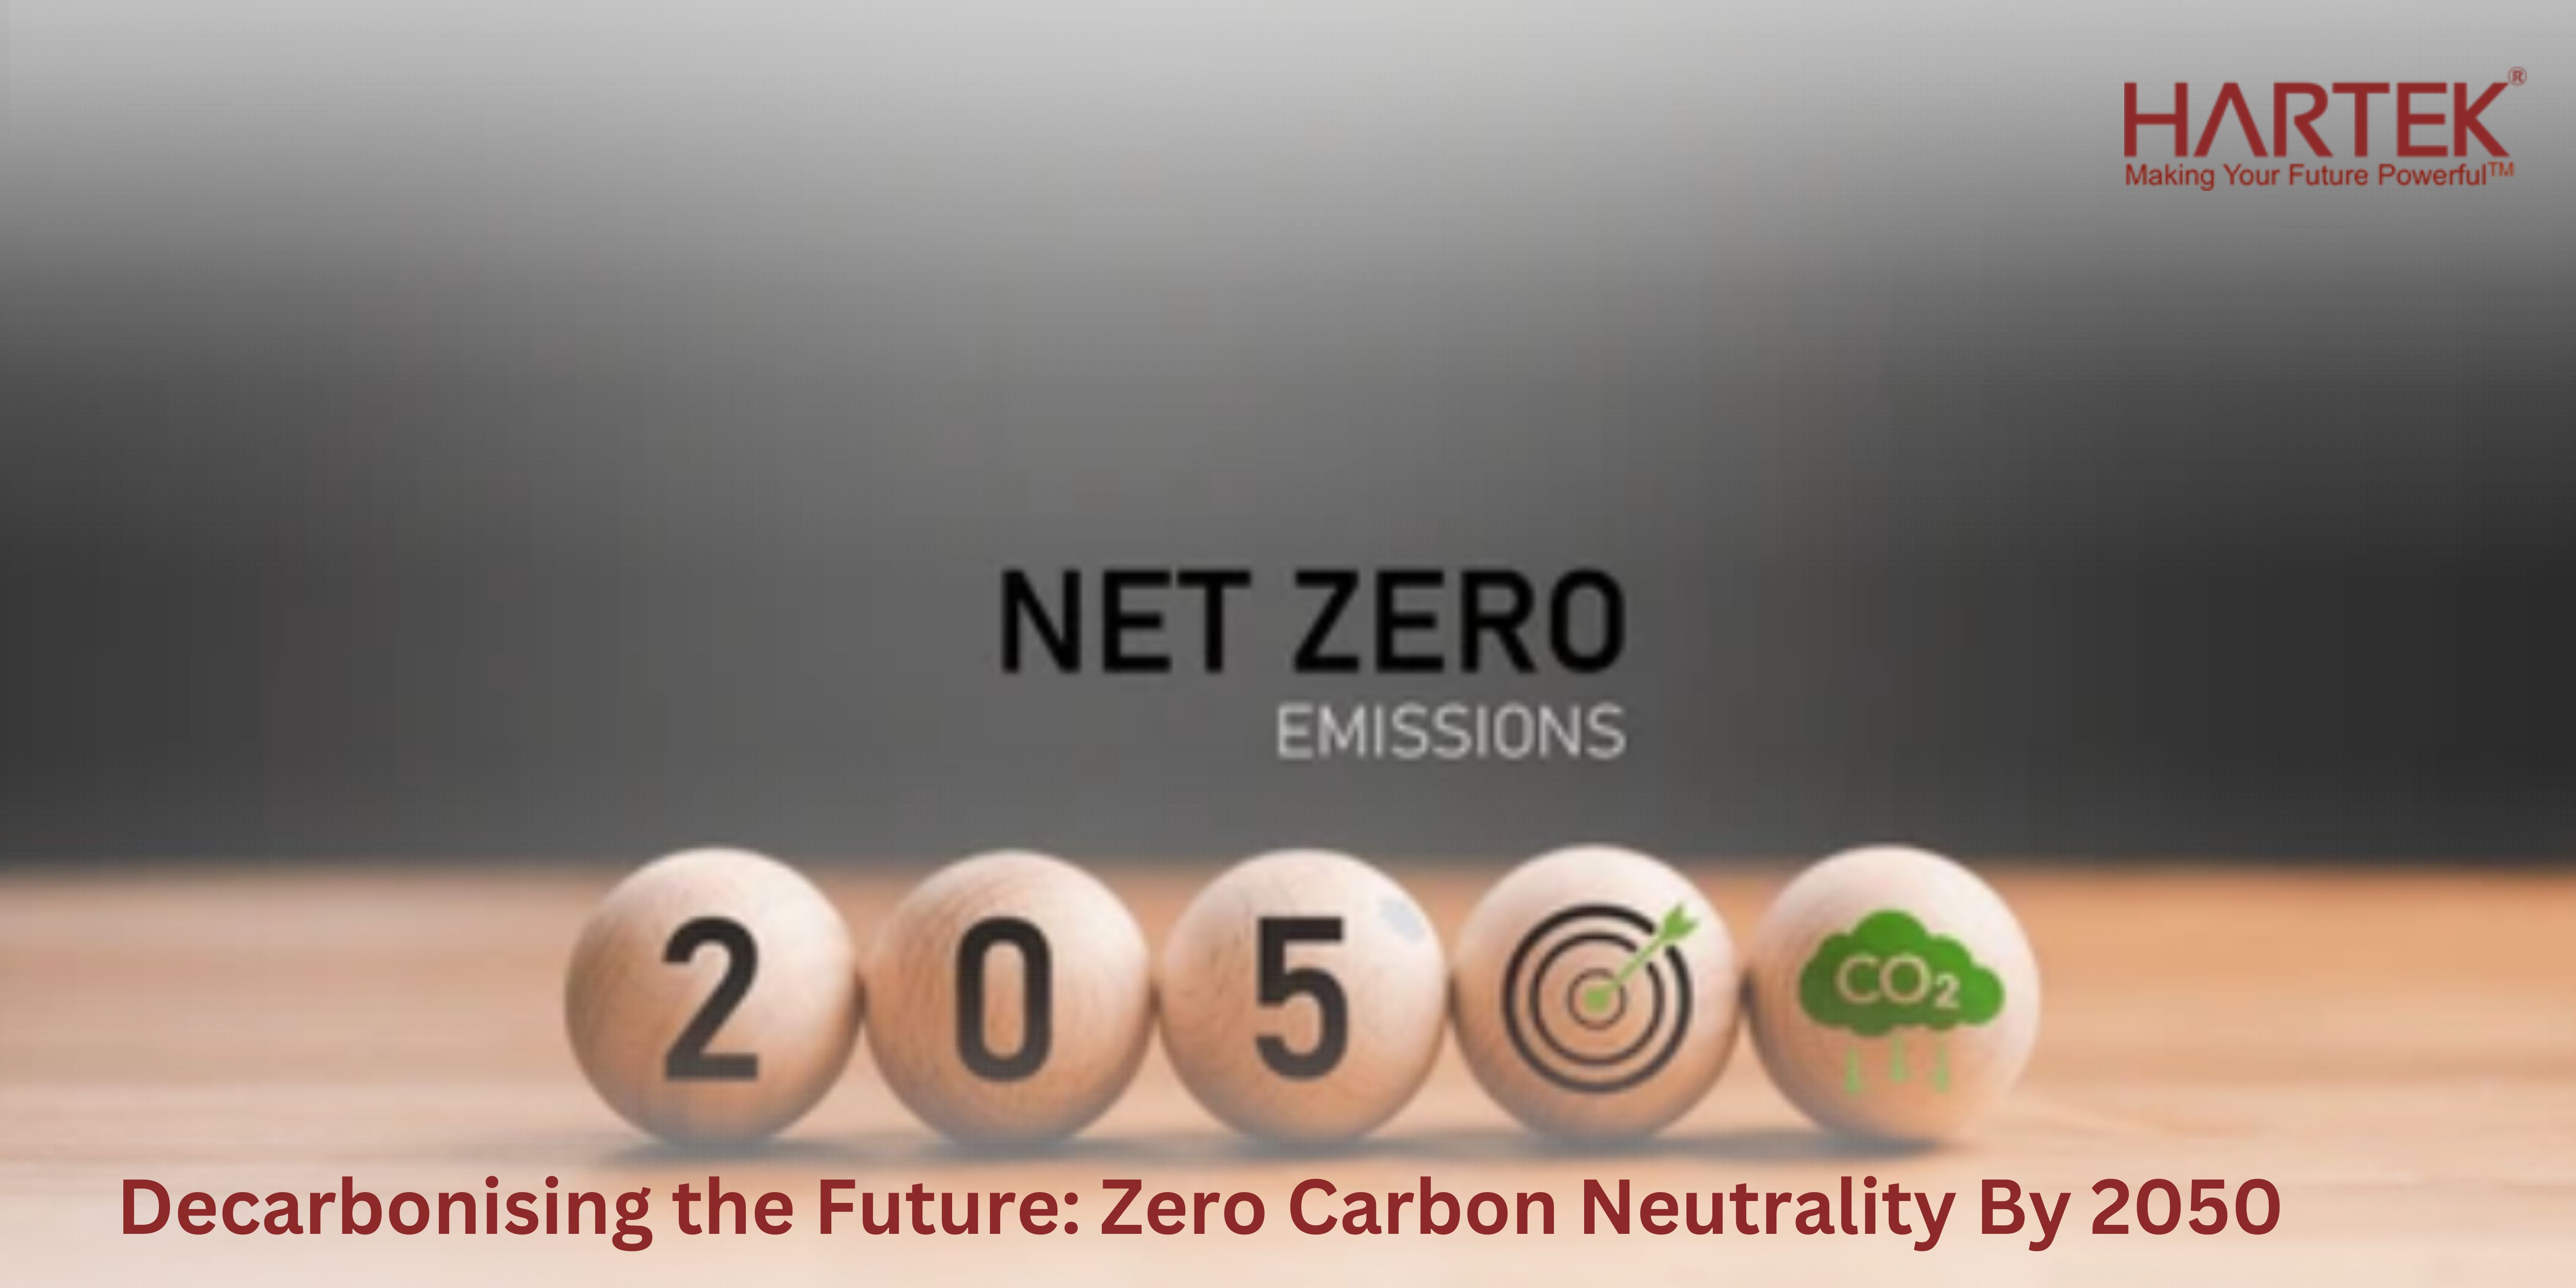 Achieving Net Zero Emissions by 2050: An Energy Sector Blueprint